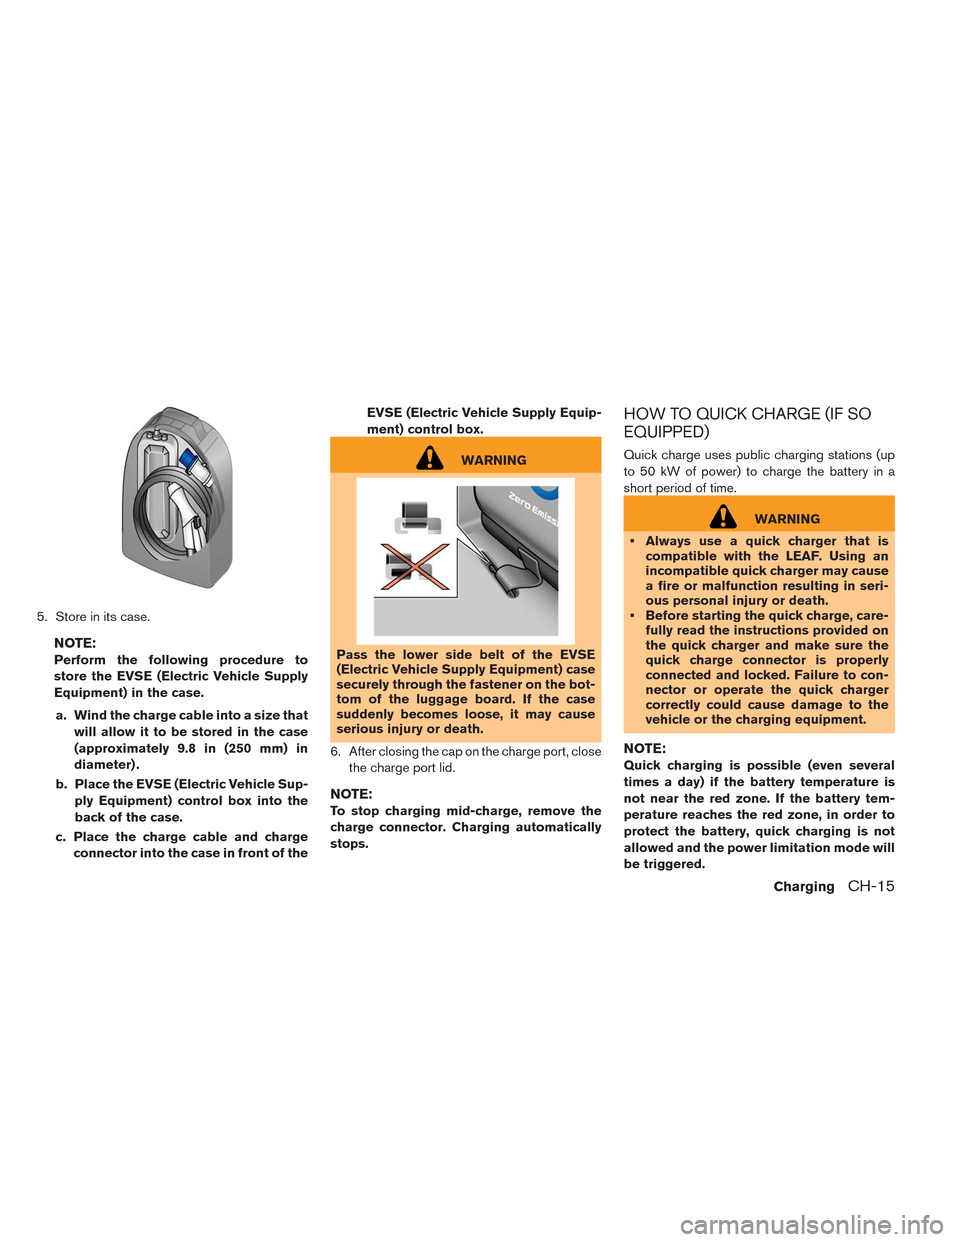 NISSAN LEAF 2014 1.G Owners Manual 5. Store in its case.
NOTE:
Perform the following procedure to
store the EVSE (Electric Vehicle Supply
Equipment) in the case.
a. Wind the charge cable into a size that
will allow it to be stored in t